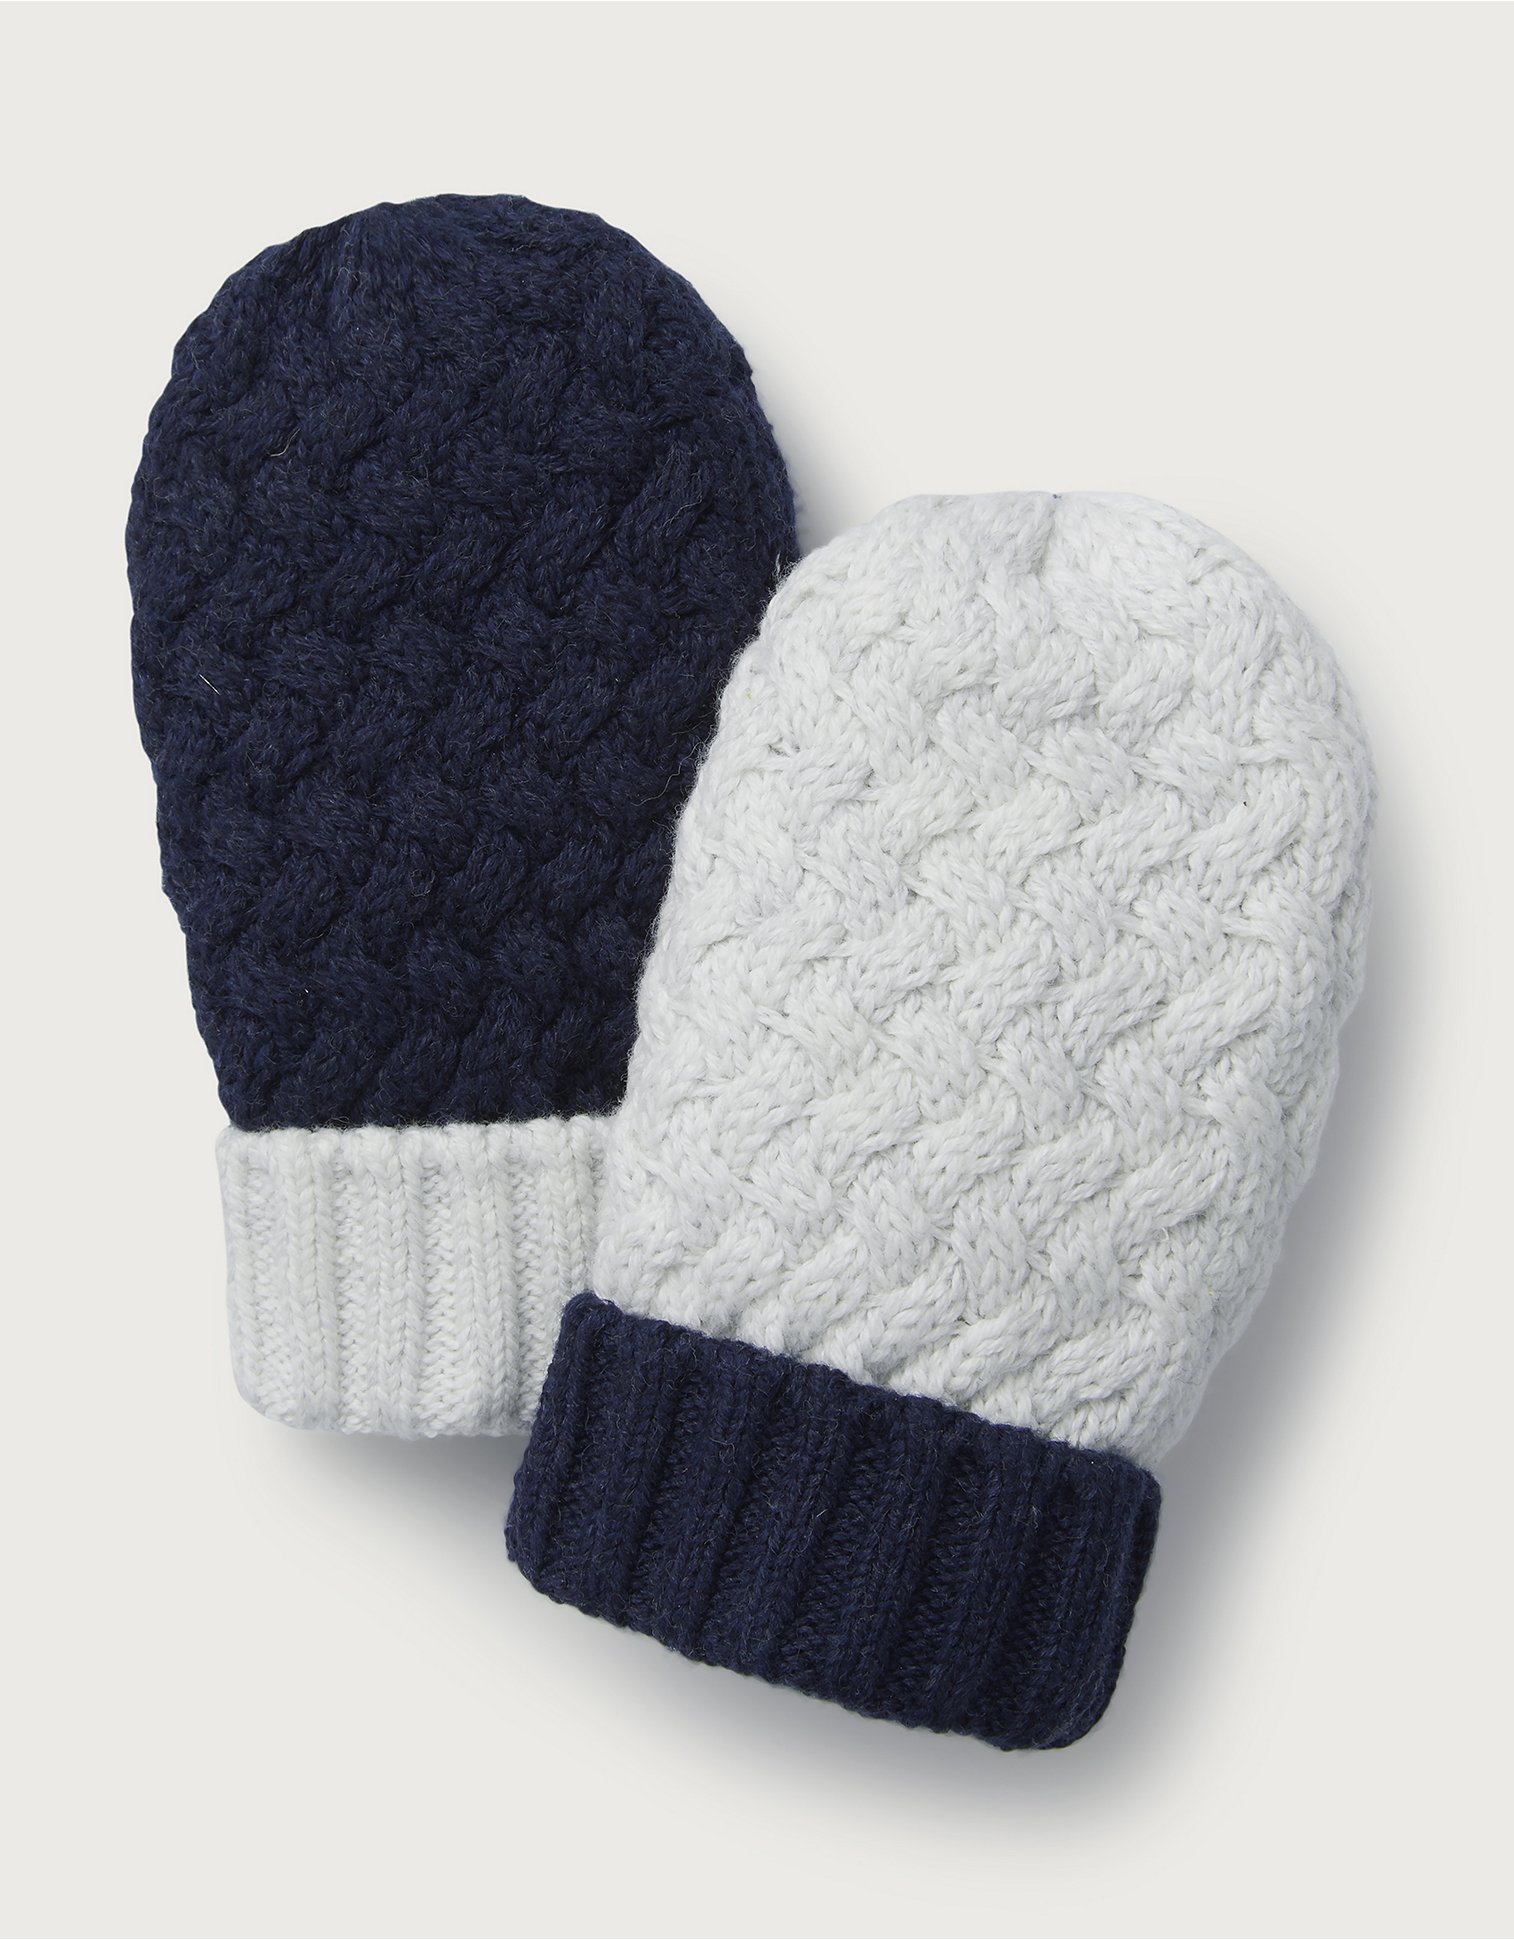 Knitted Organic-Cotton Mittens The White Company Boys Accessories Gloves 1-2Y 